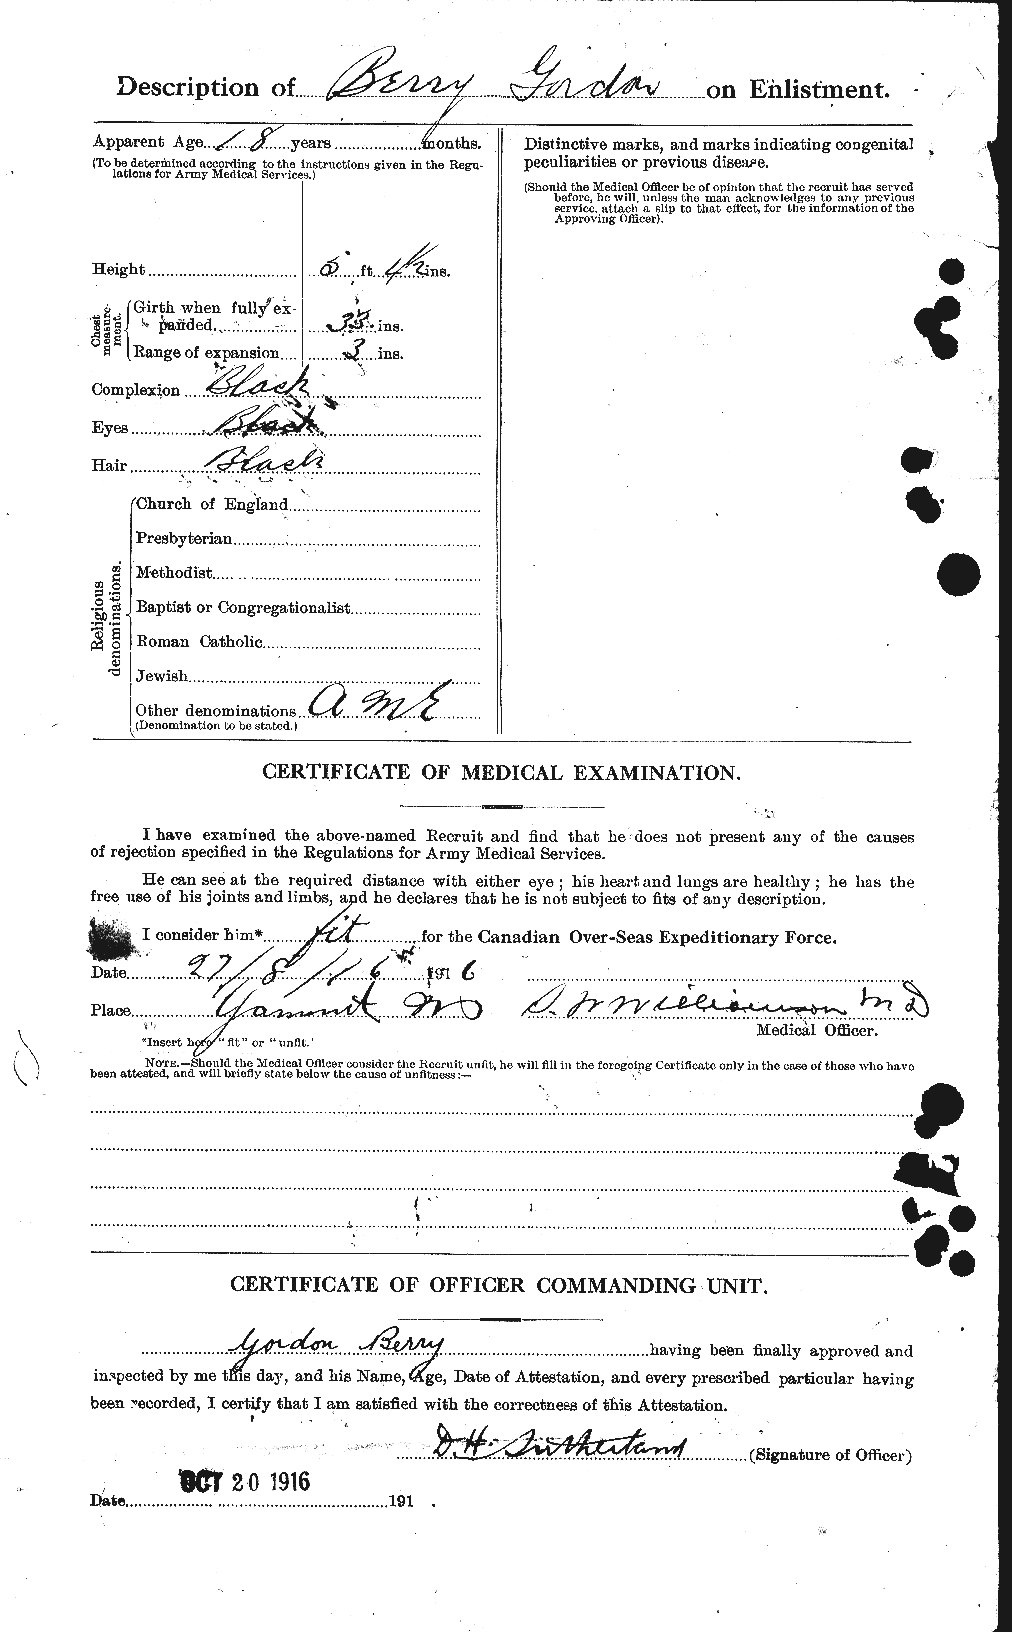 Personnel Records of the First World War - CEF 240903b